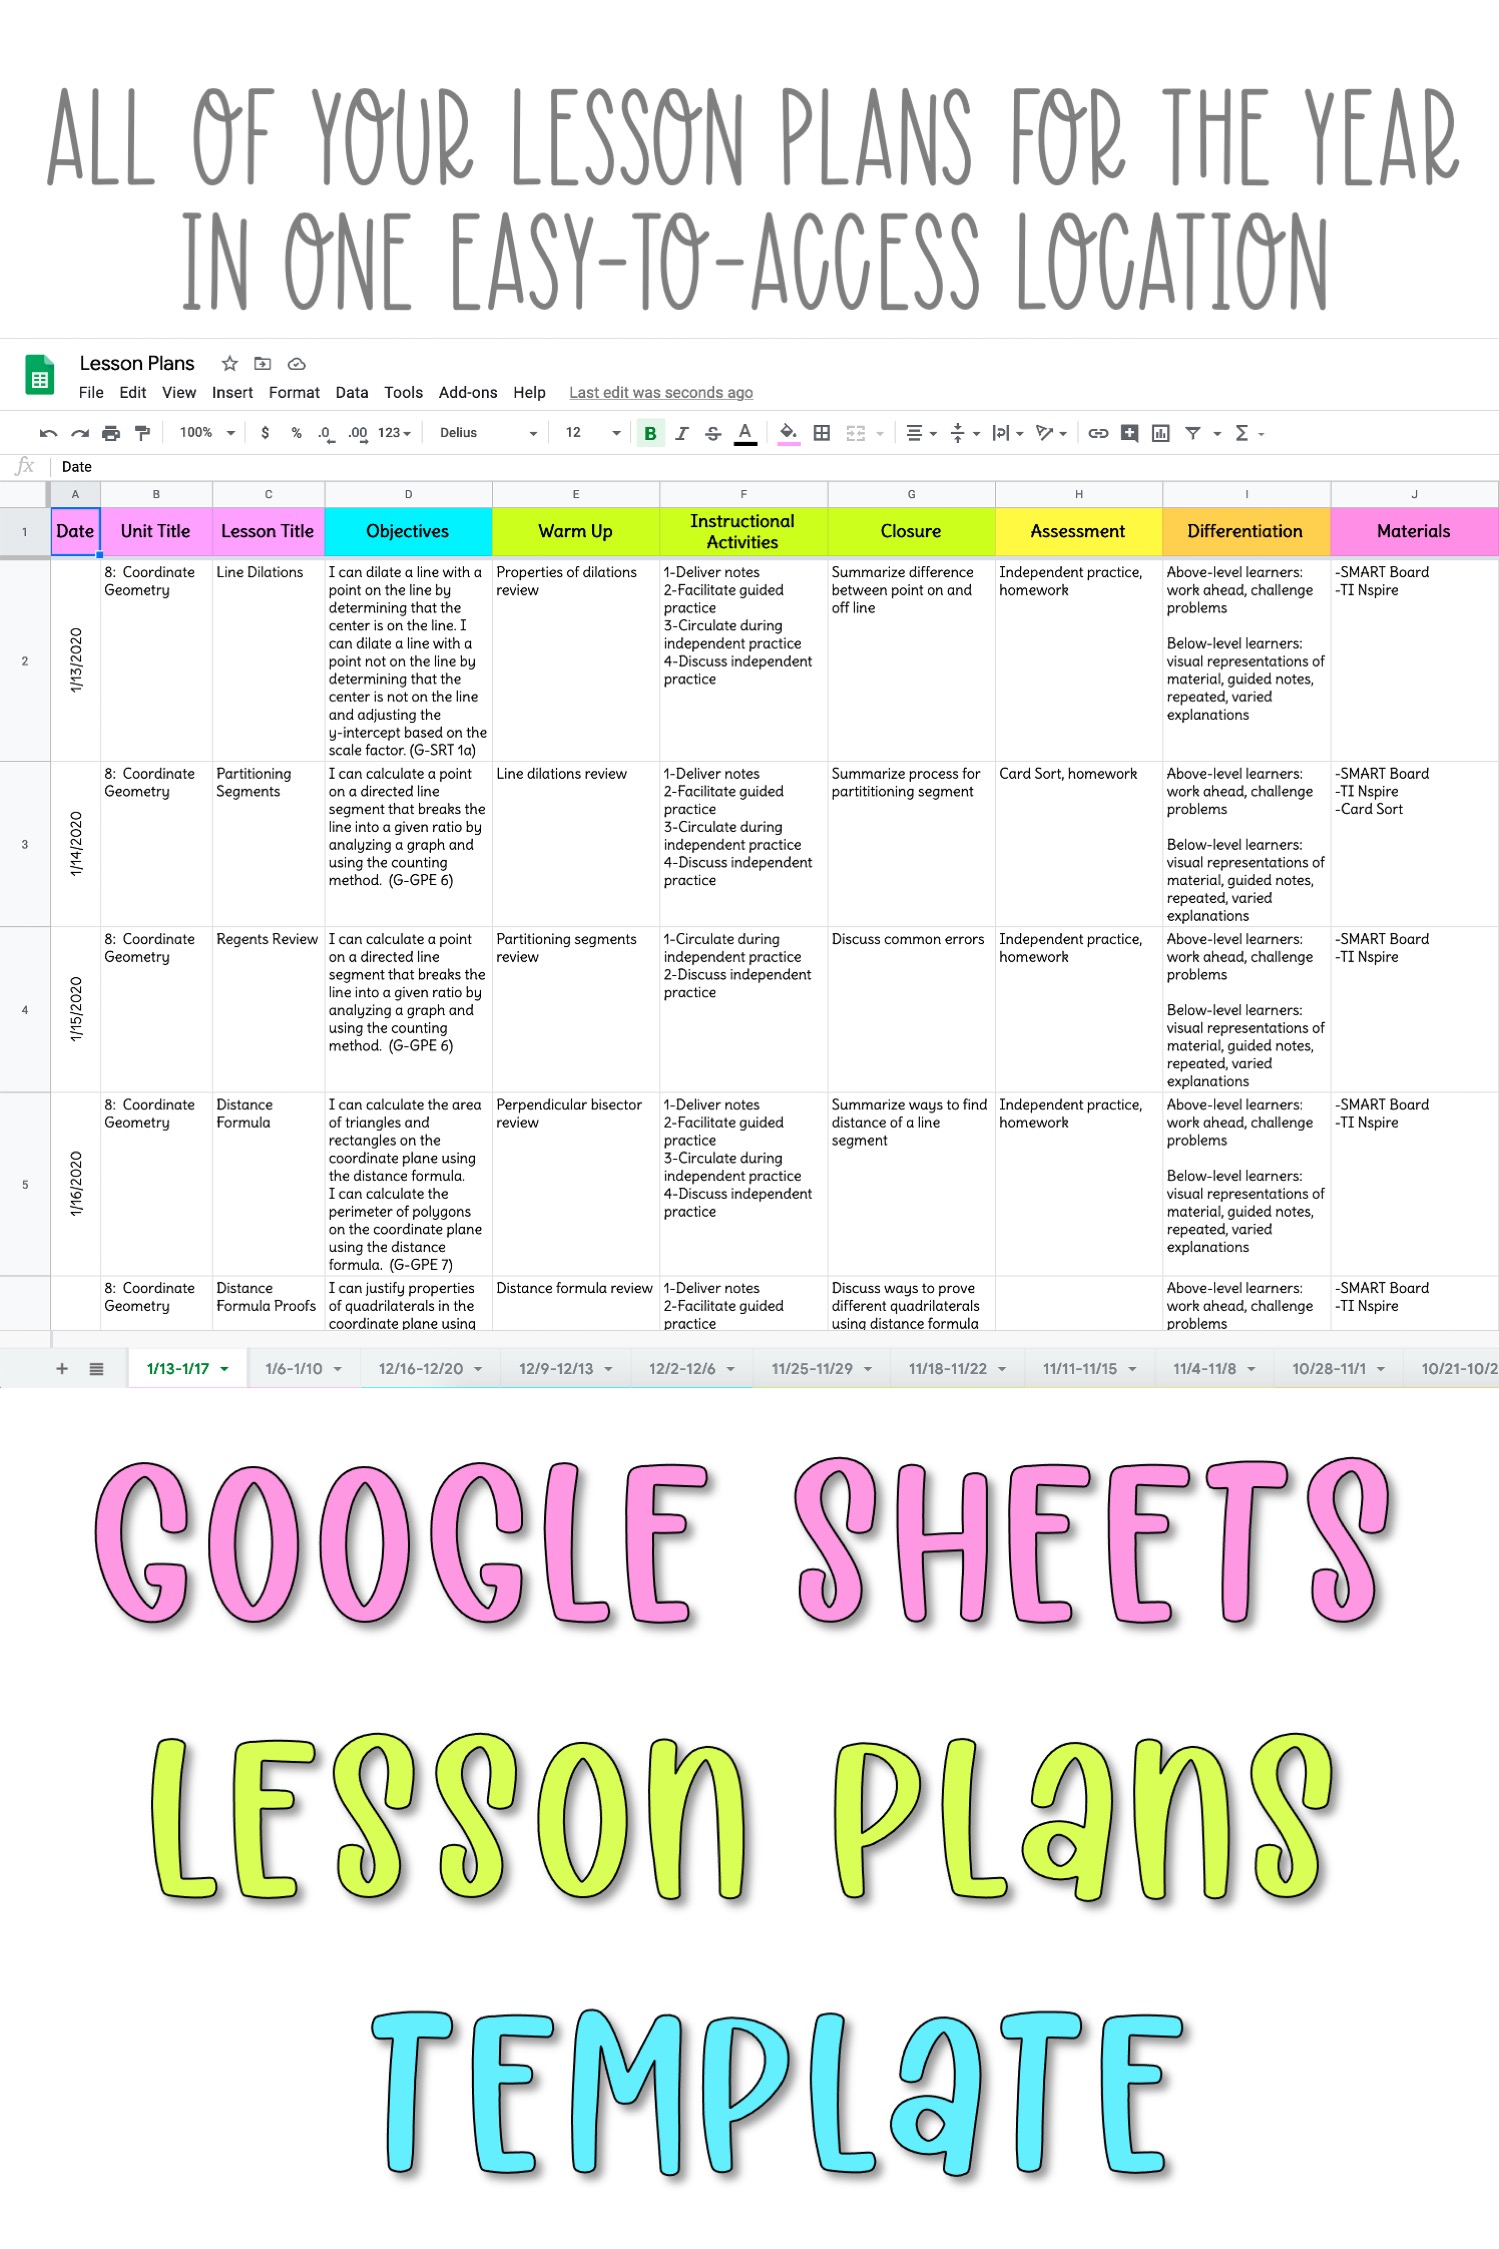 google-sheets-lesson-plan-template-busy-miss-beebe